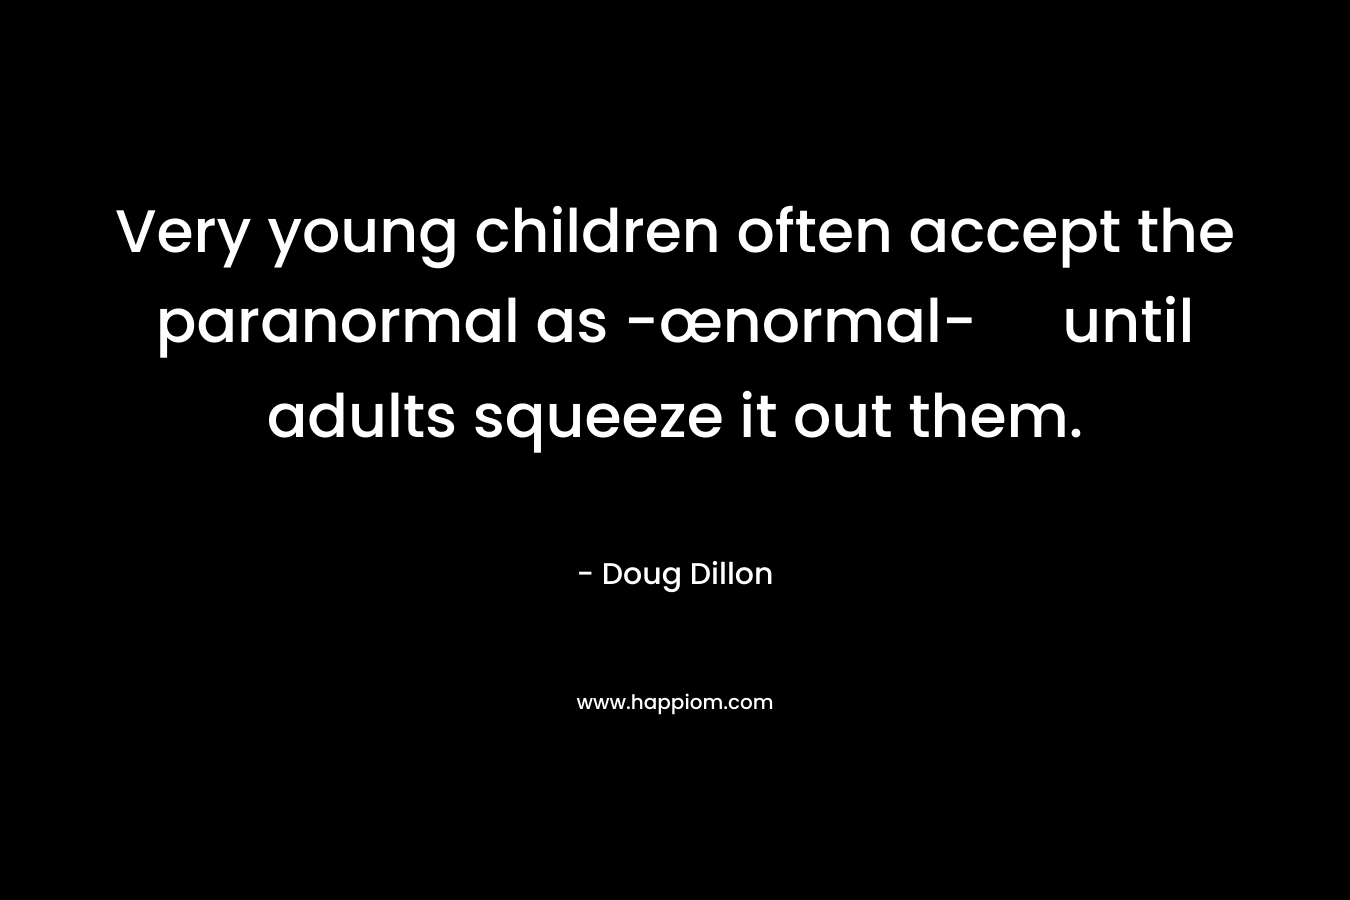 Very young children often accept the paranormal as -œnormal- until adults squeeze it out them.